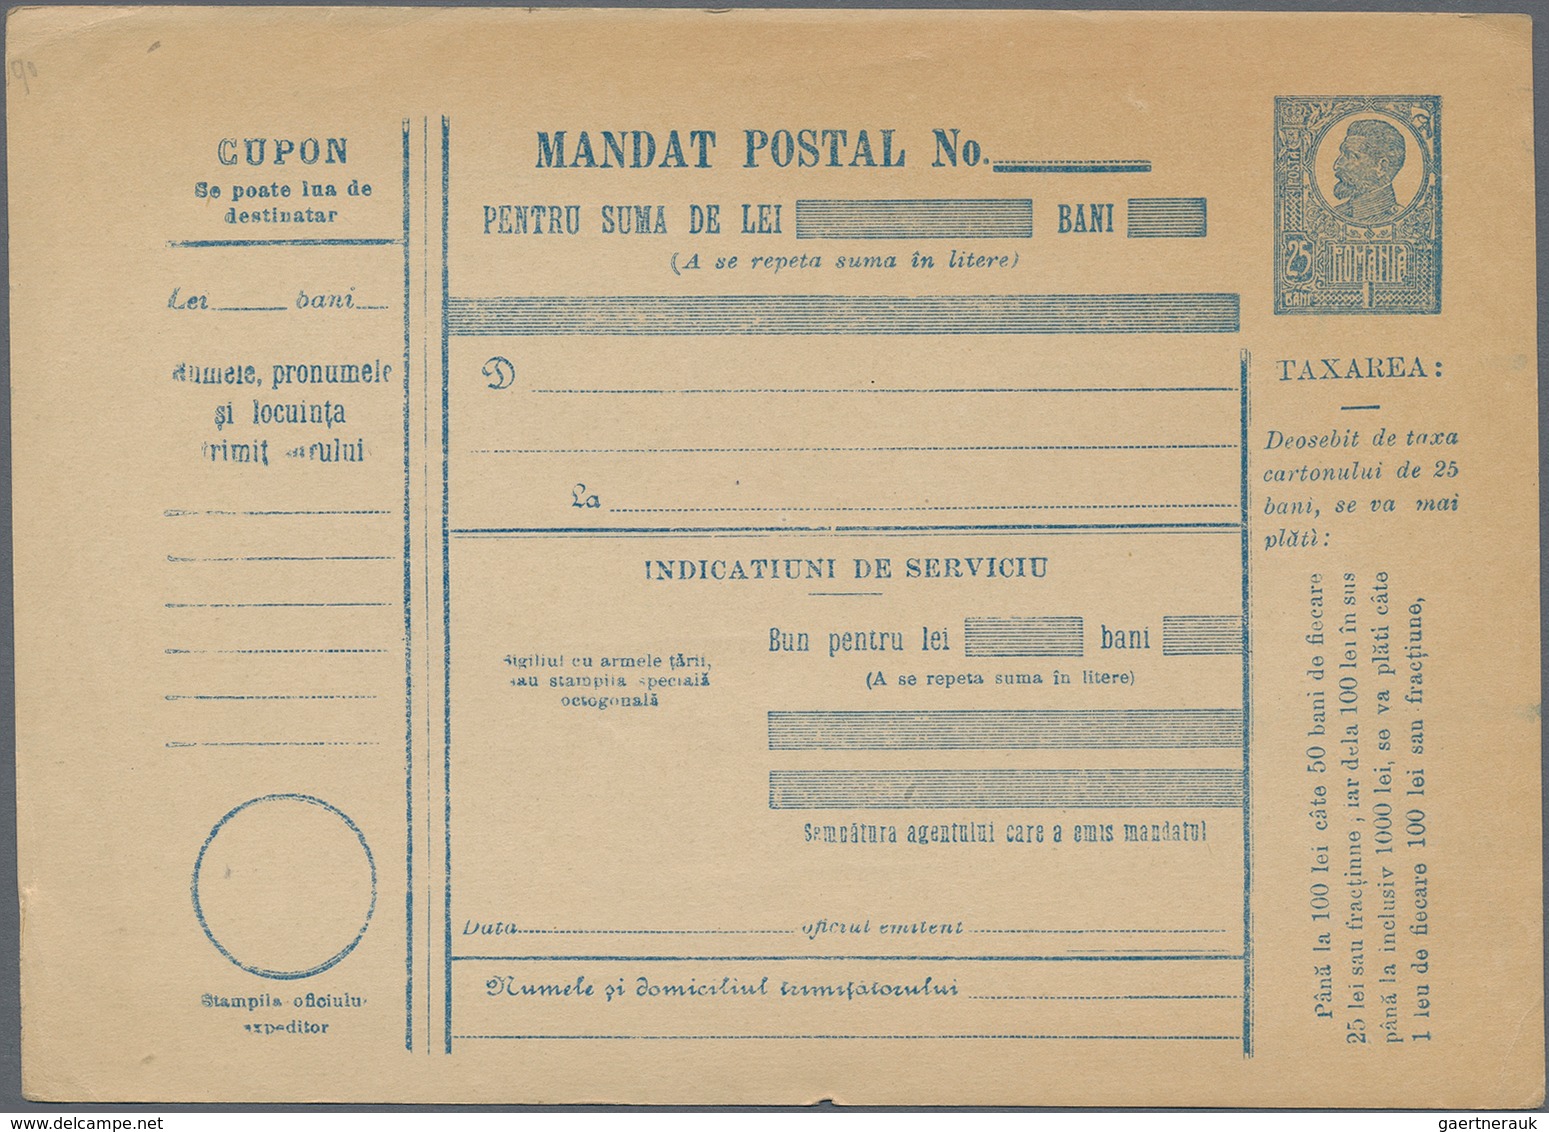 Rumänien - Ganzsachen: 1873/1950 (ca.), holding of about 220 unused and used postal stationery, stat